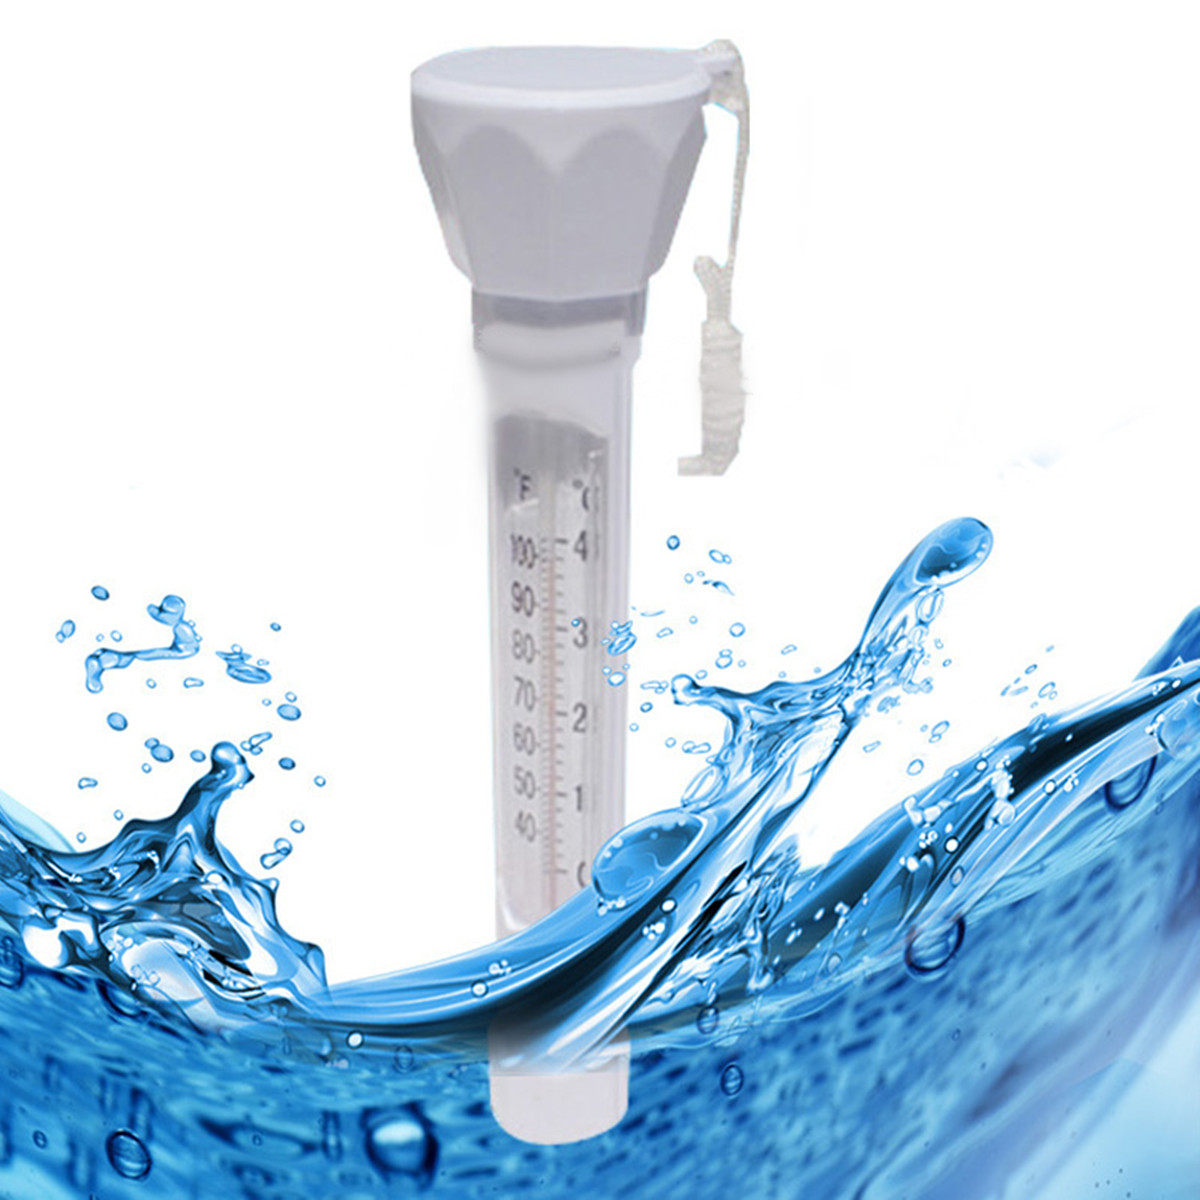 White-Floating-Water-Swimming-Pool-Bath-Spa-Hot-Tub-Temperature-Thermometer--1151459-1